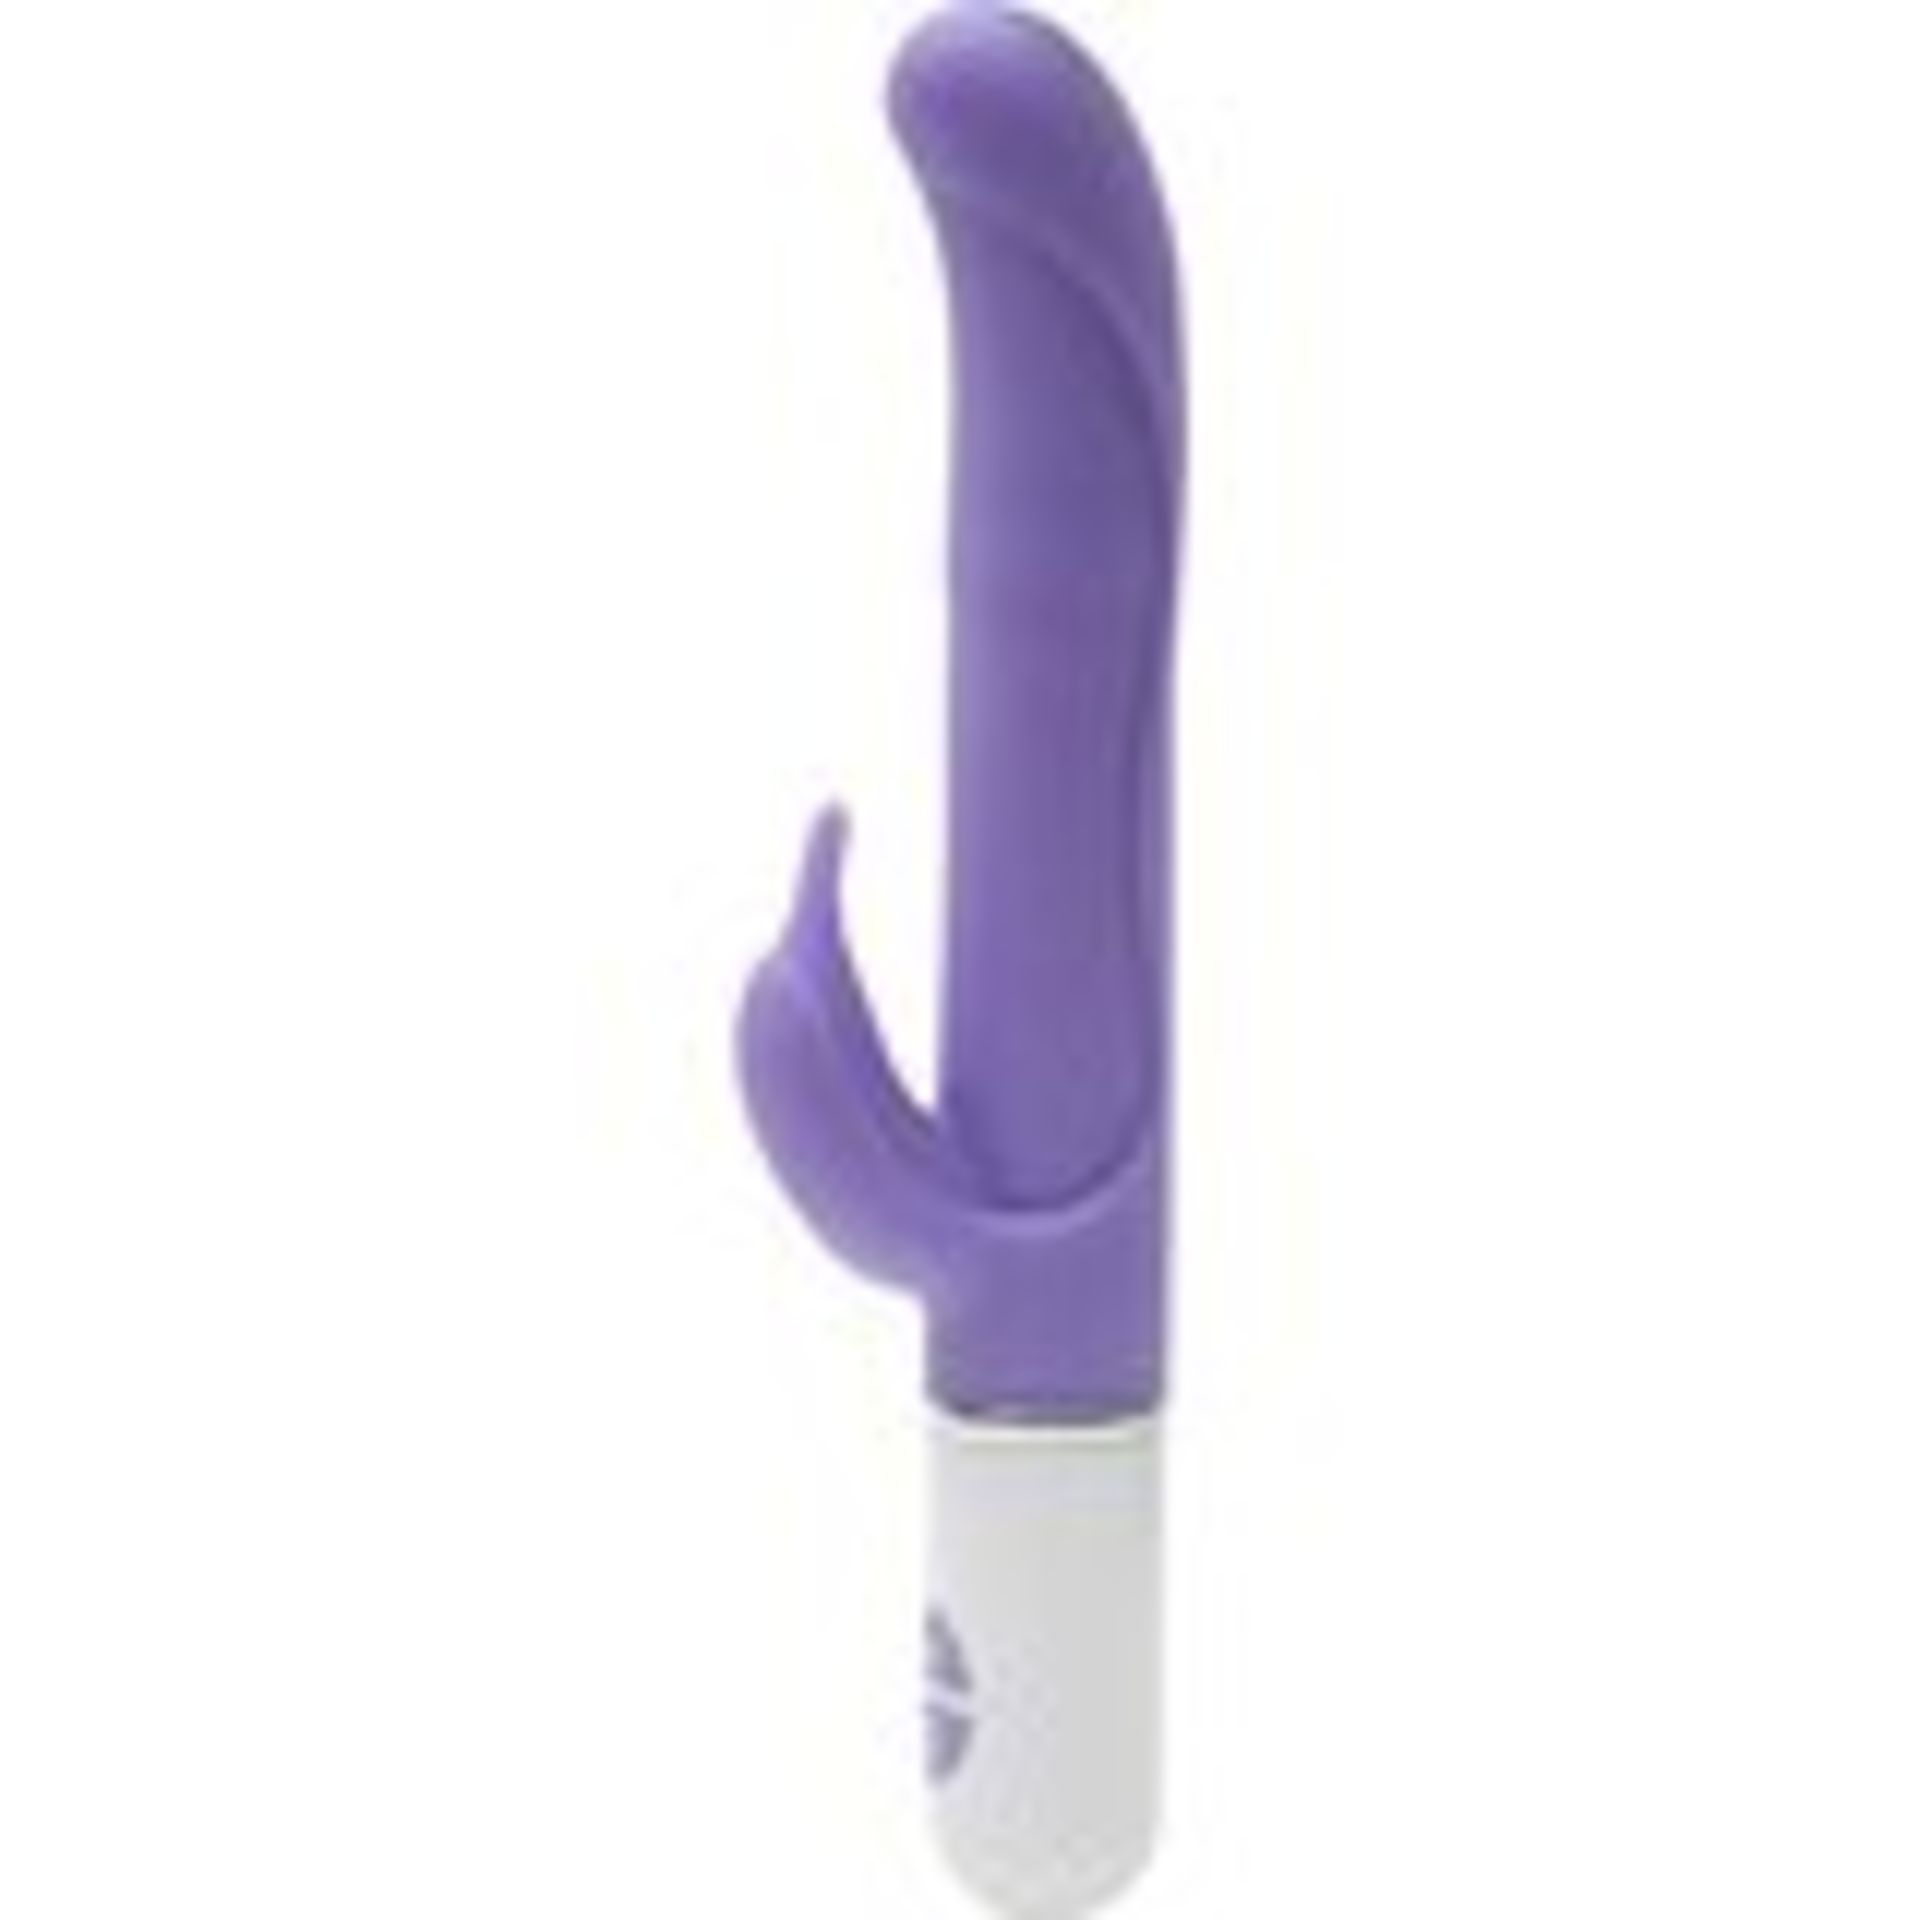 ADULT PRODUCTS - 1 Box of 58 units - Latest AMZ price £960 - Image 8 of 8